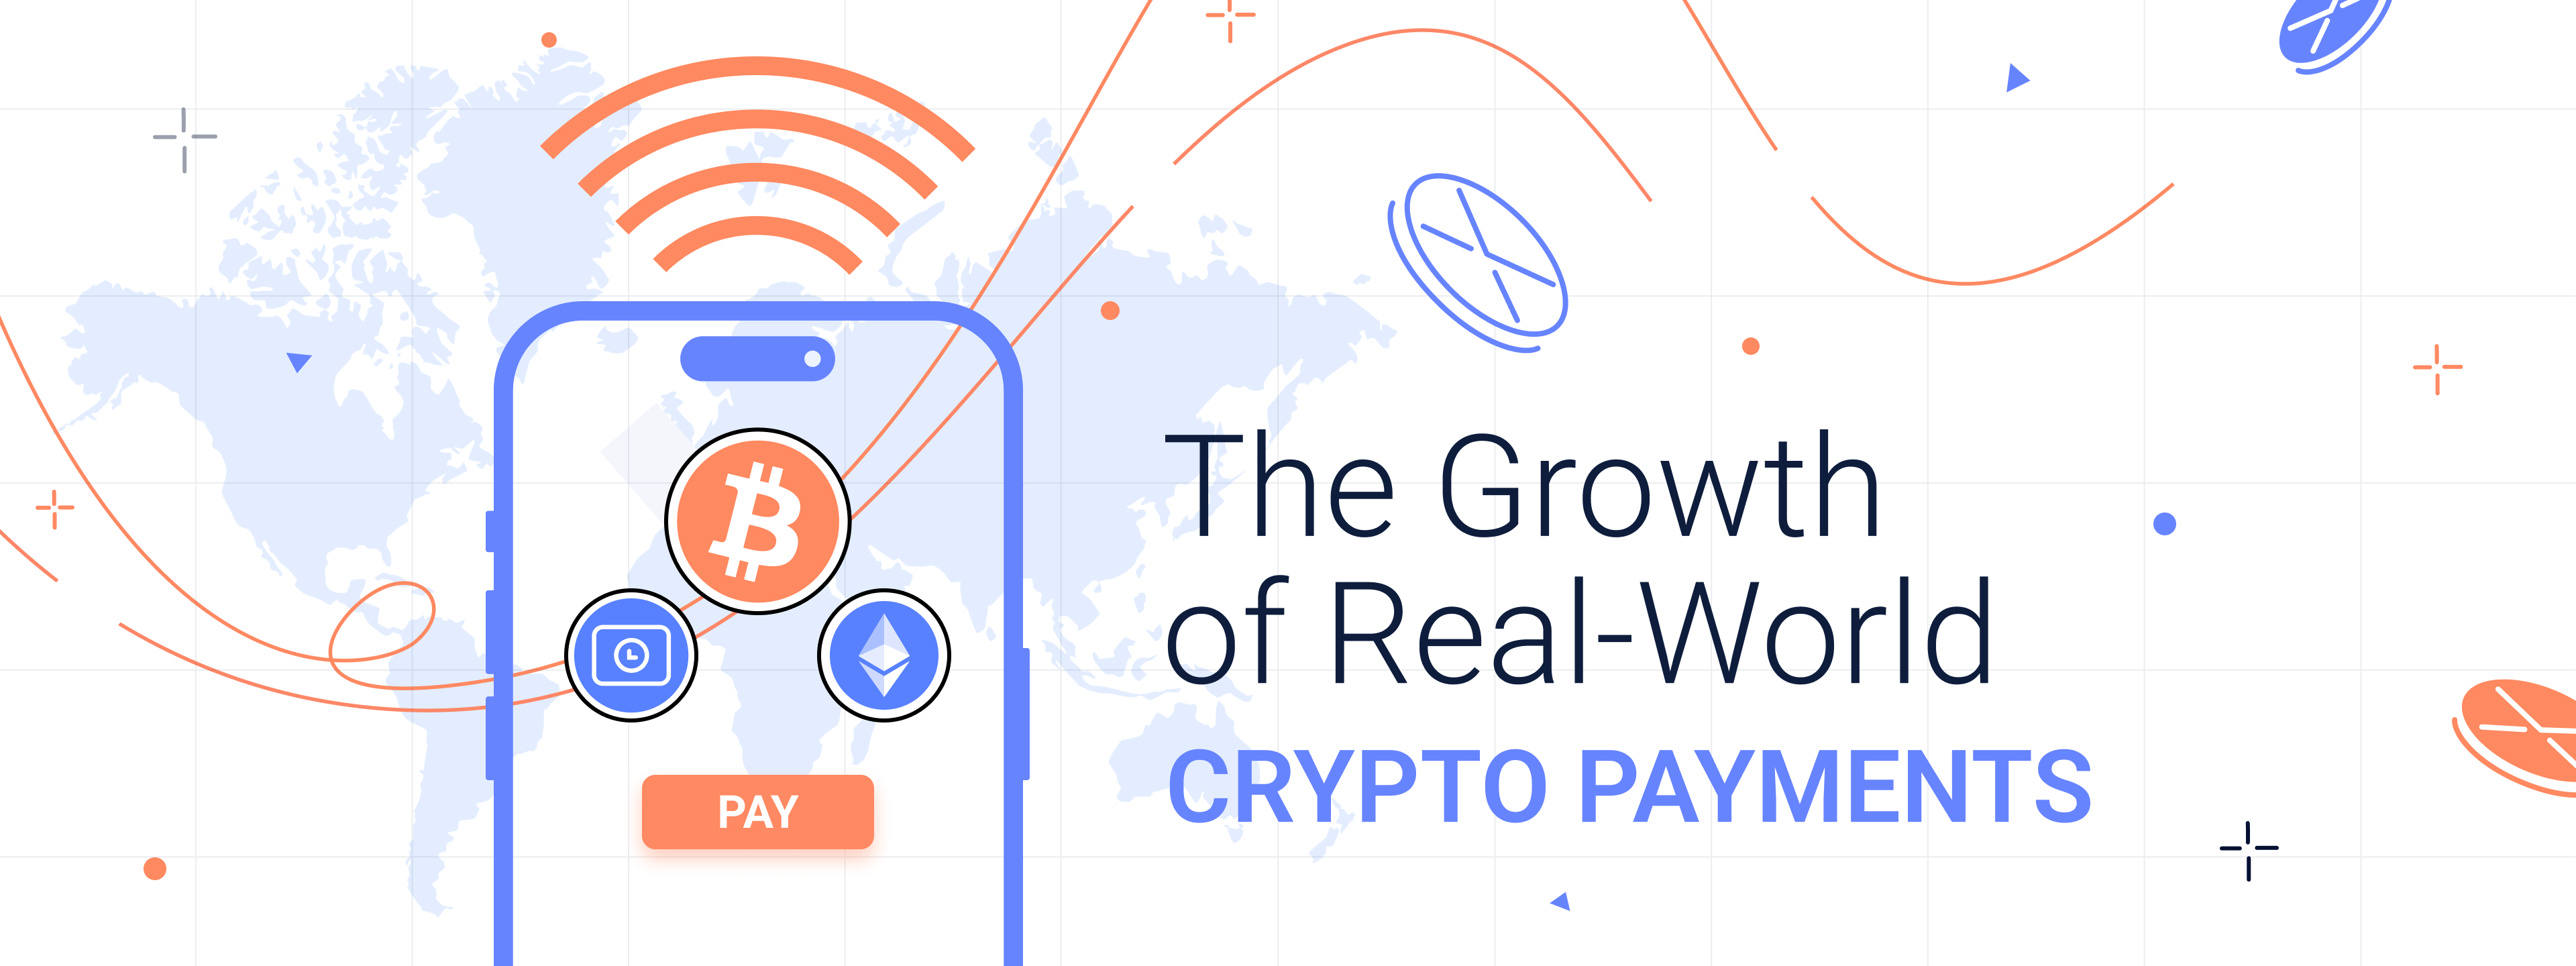 The Growth Of Real-World Crypto Payments